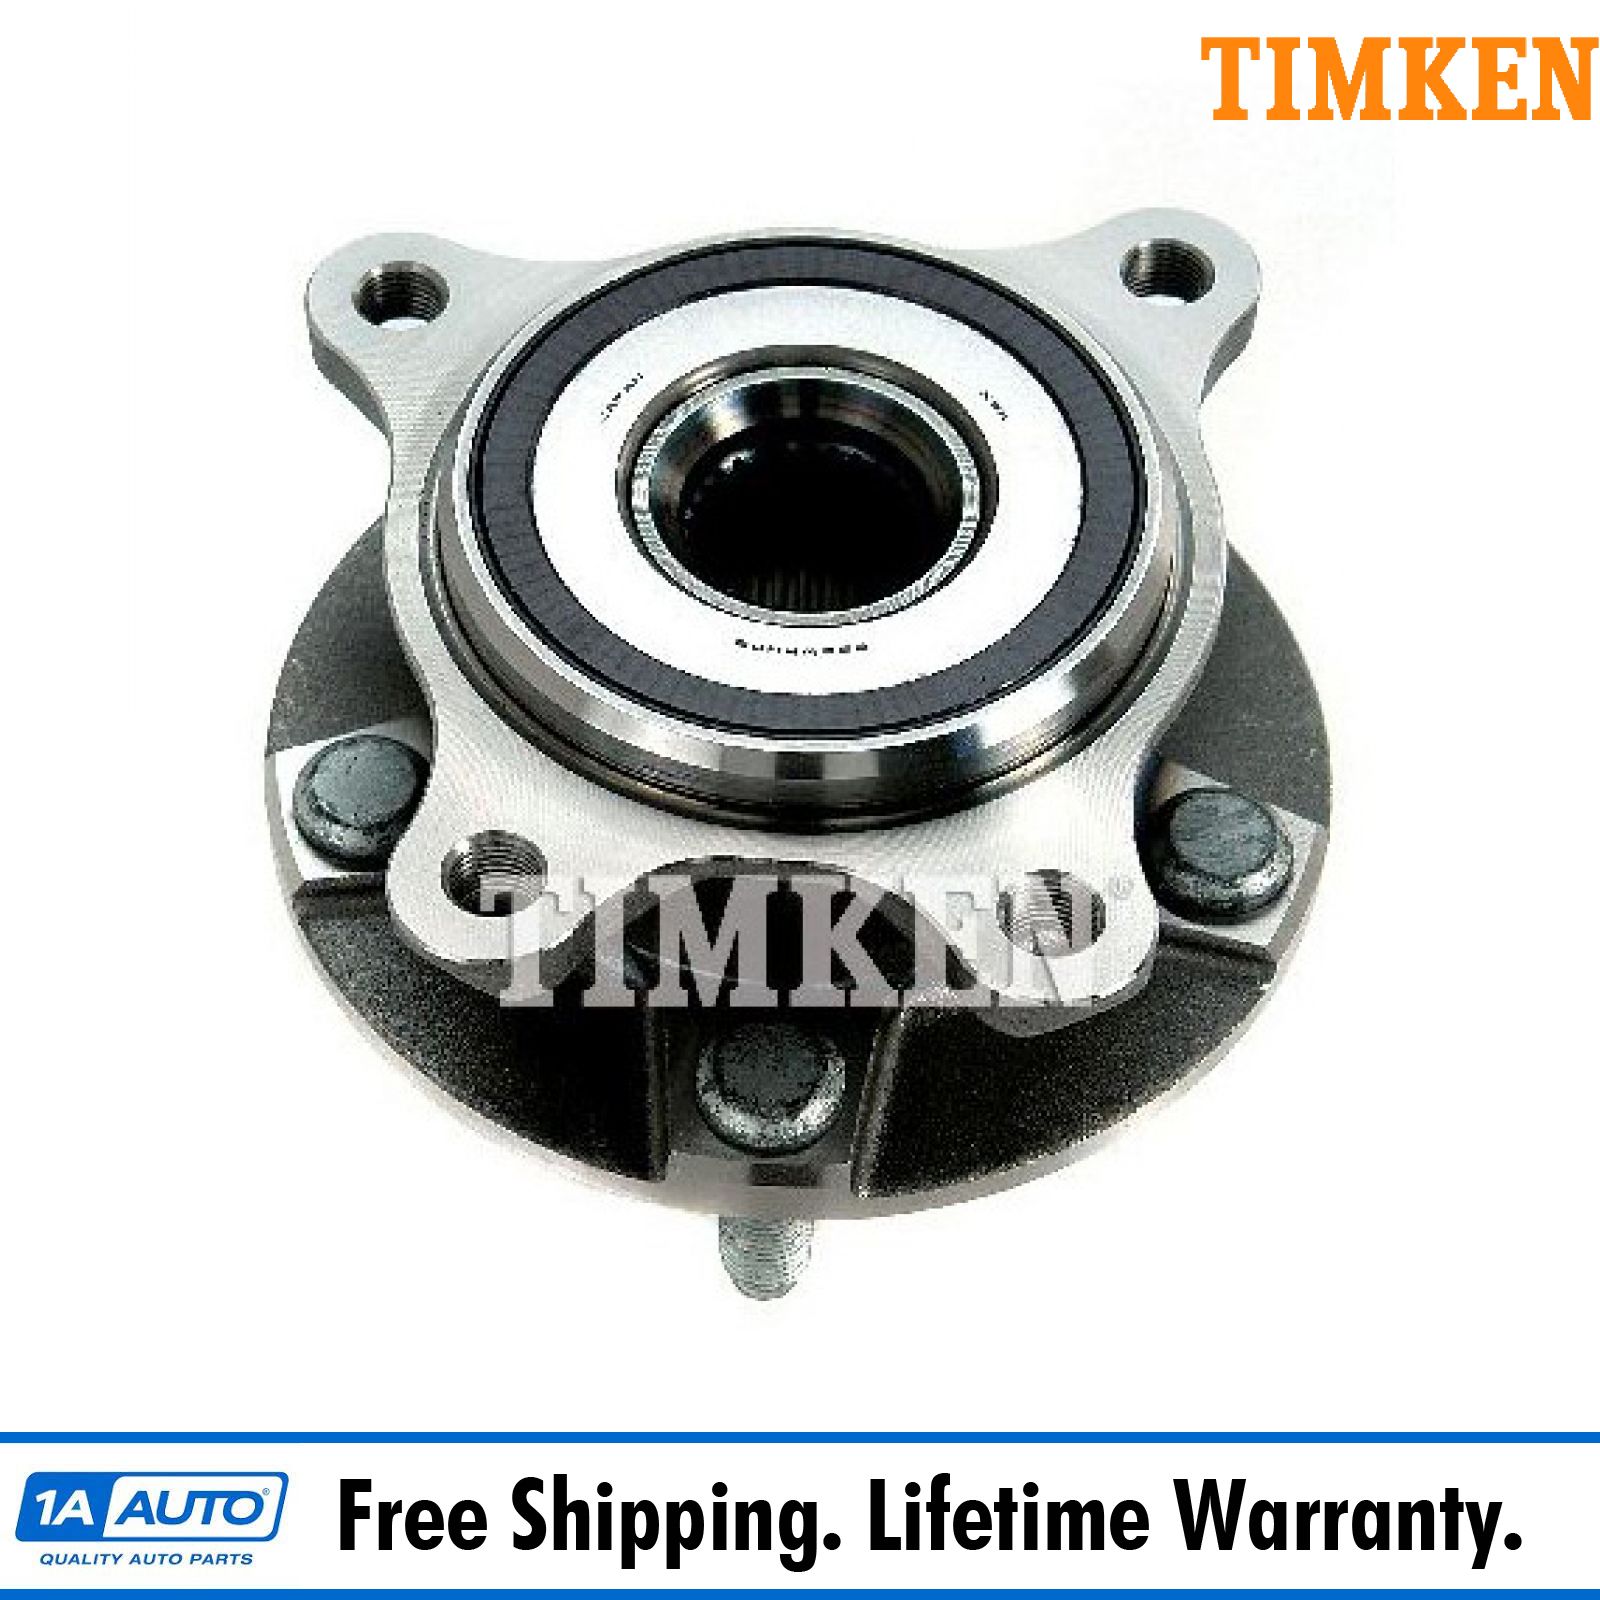 TIMKEN Wheel Bearing /& Hub Front Driver Side LH for GS300 GS350 IS250 IS350 AWD